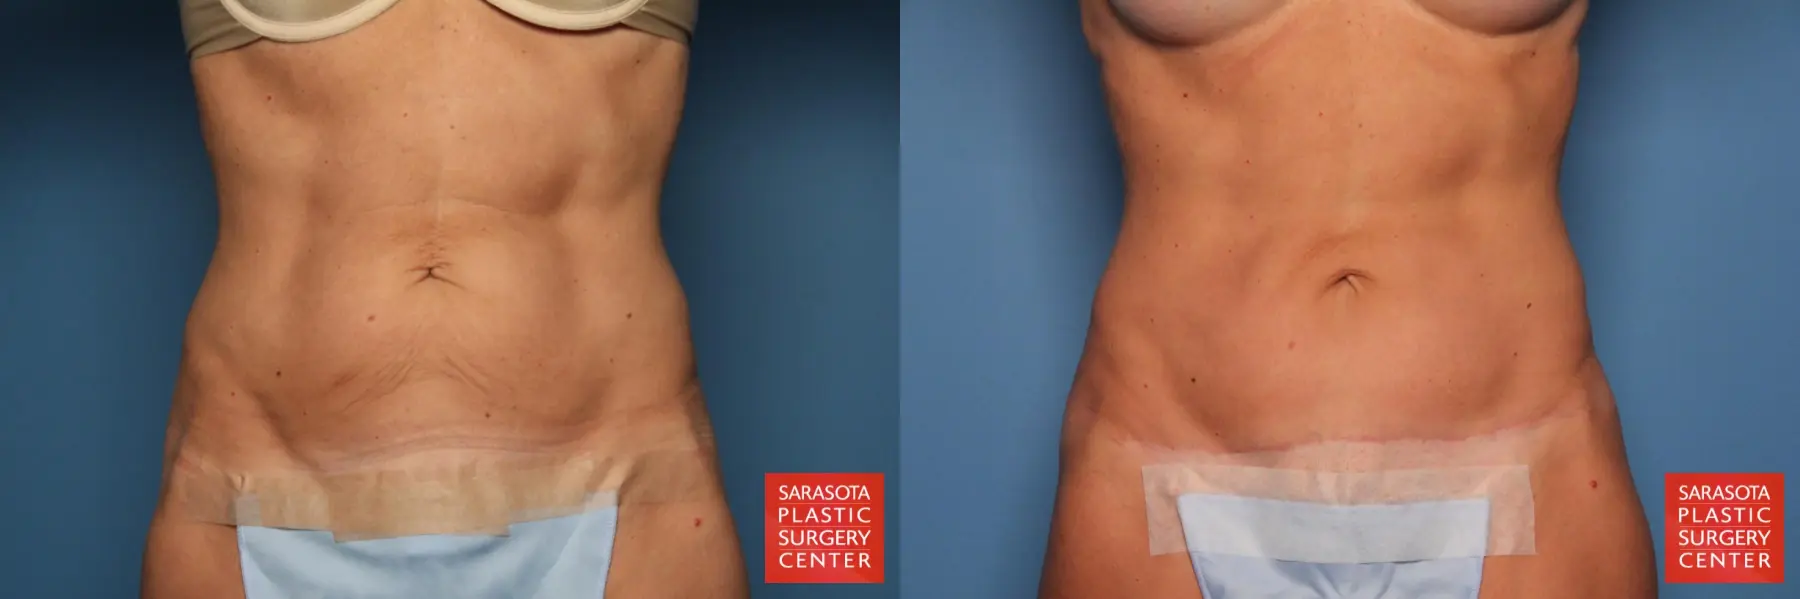 Mini Tummy Tuck: Patient 2 - Before and After 1